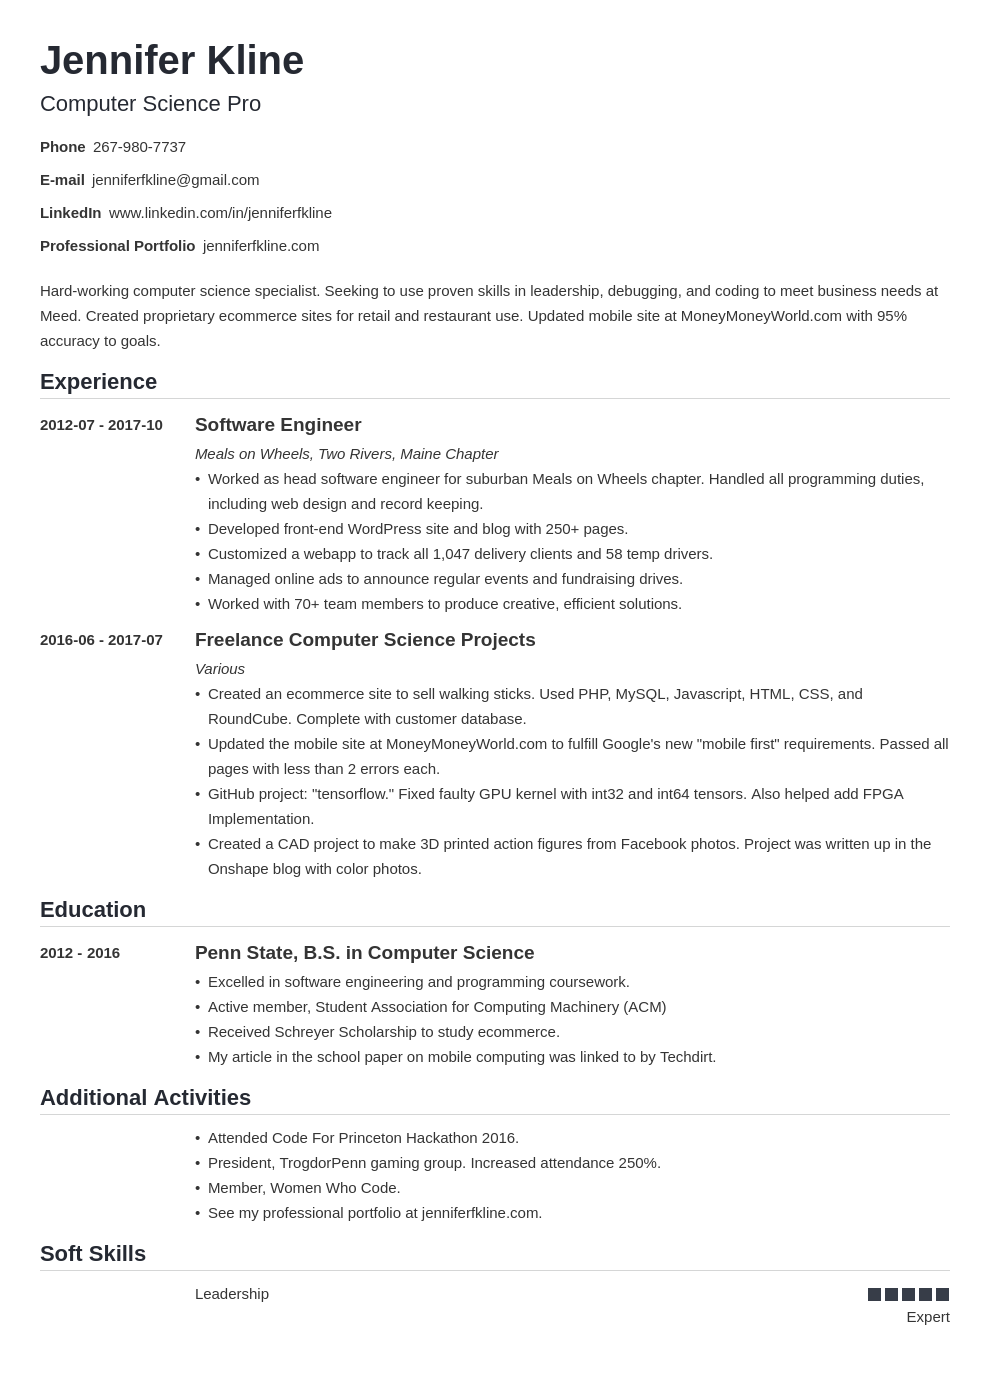 How To List Volunteer Work Experience On A Resume: Example With Regard To Volunteer Job Description Template